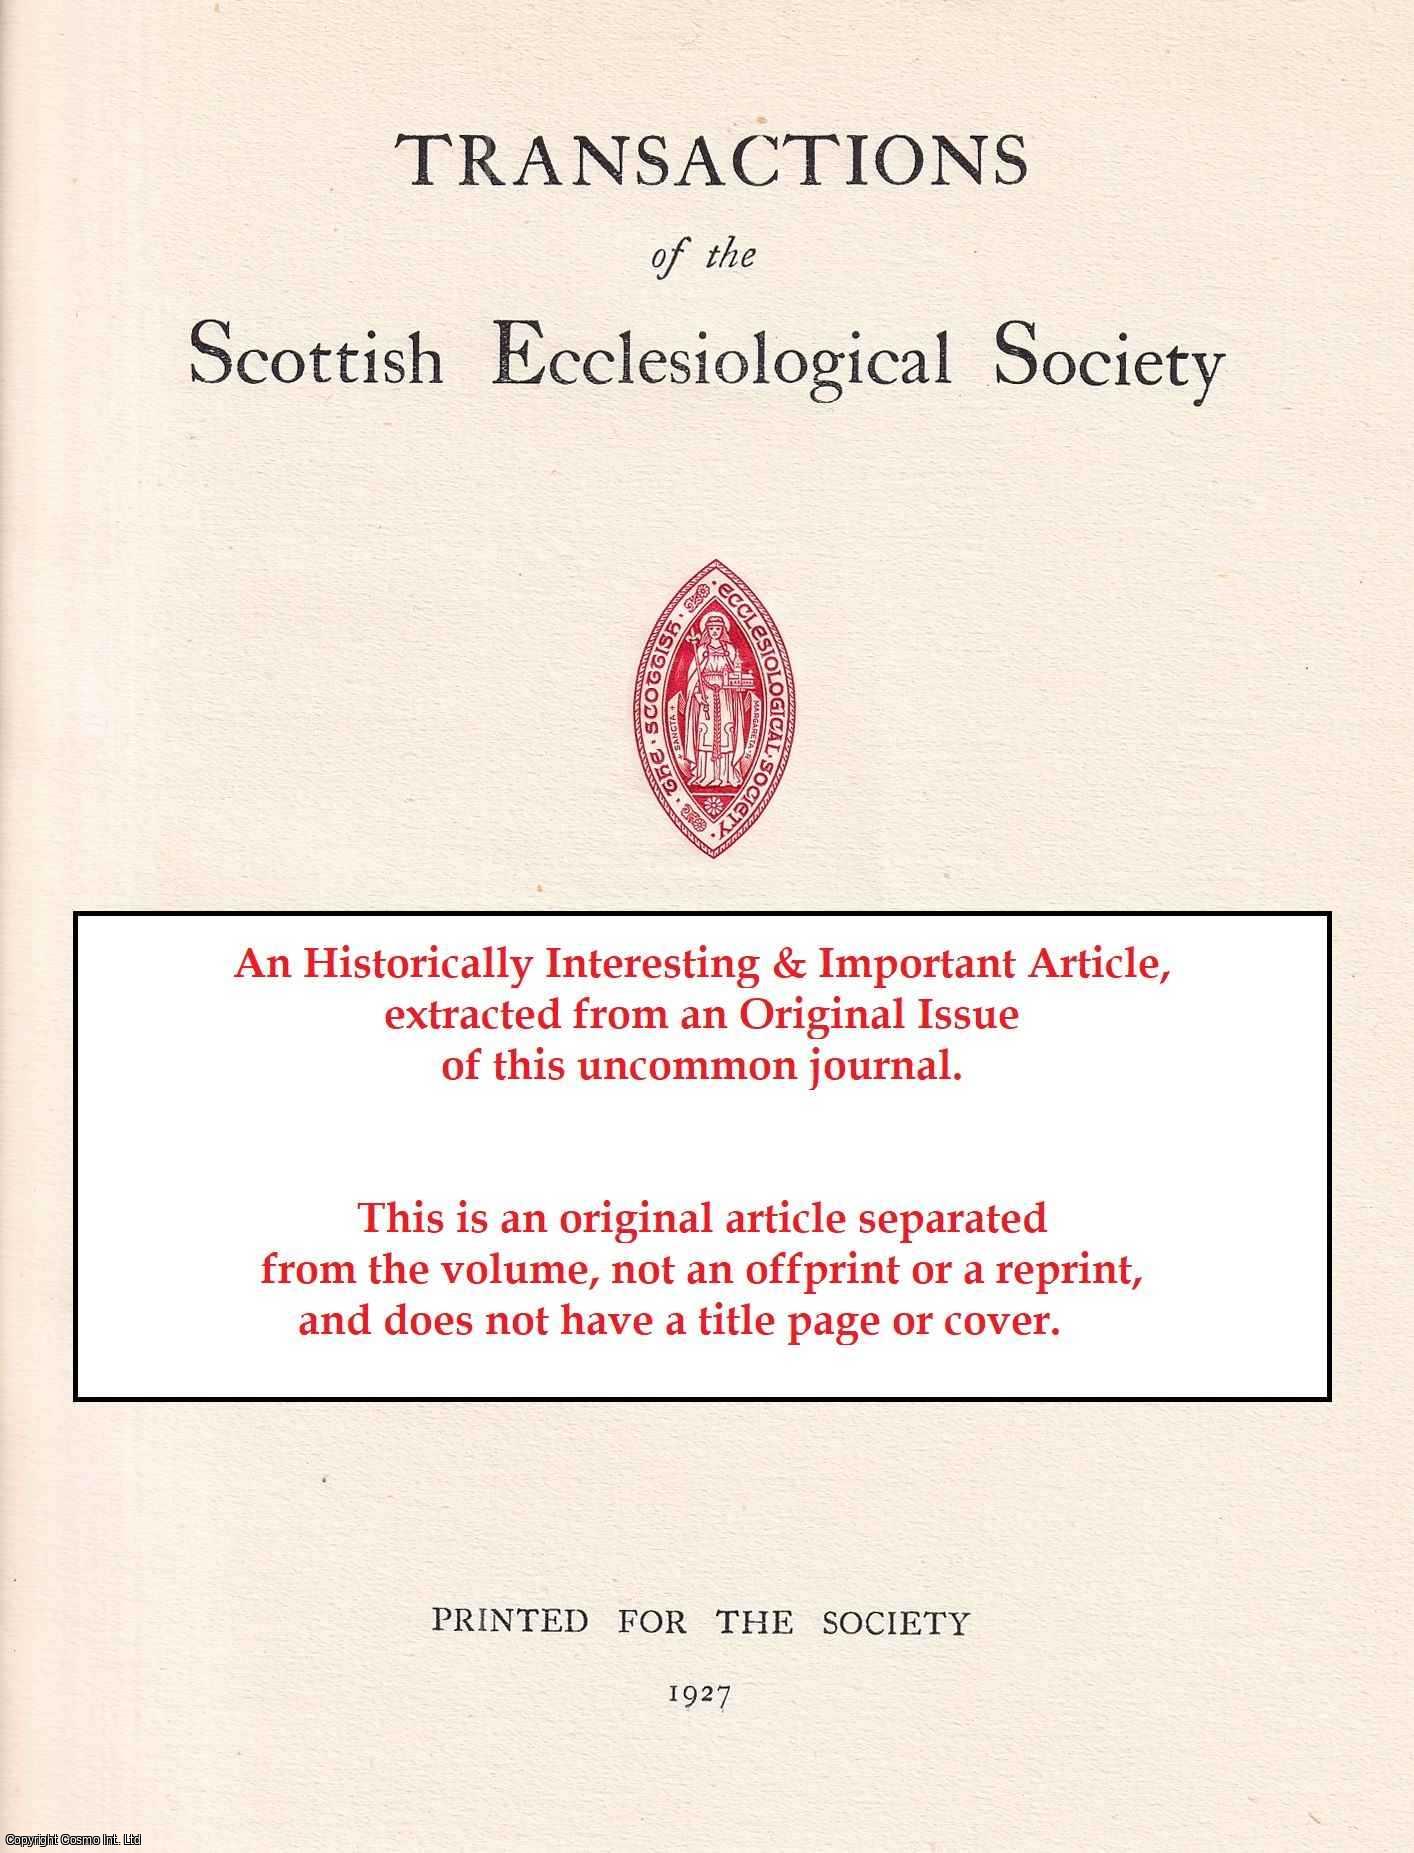 Hugh F. Campbell - The Cathedral of Caithness at Dornoch. An original article from the Transactions of the Aberdeen Ecclesiological Society, 1892.